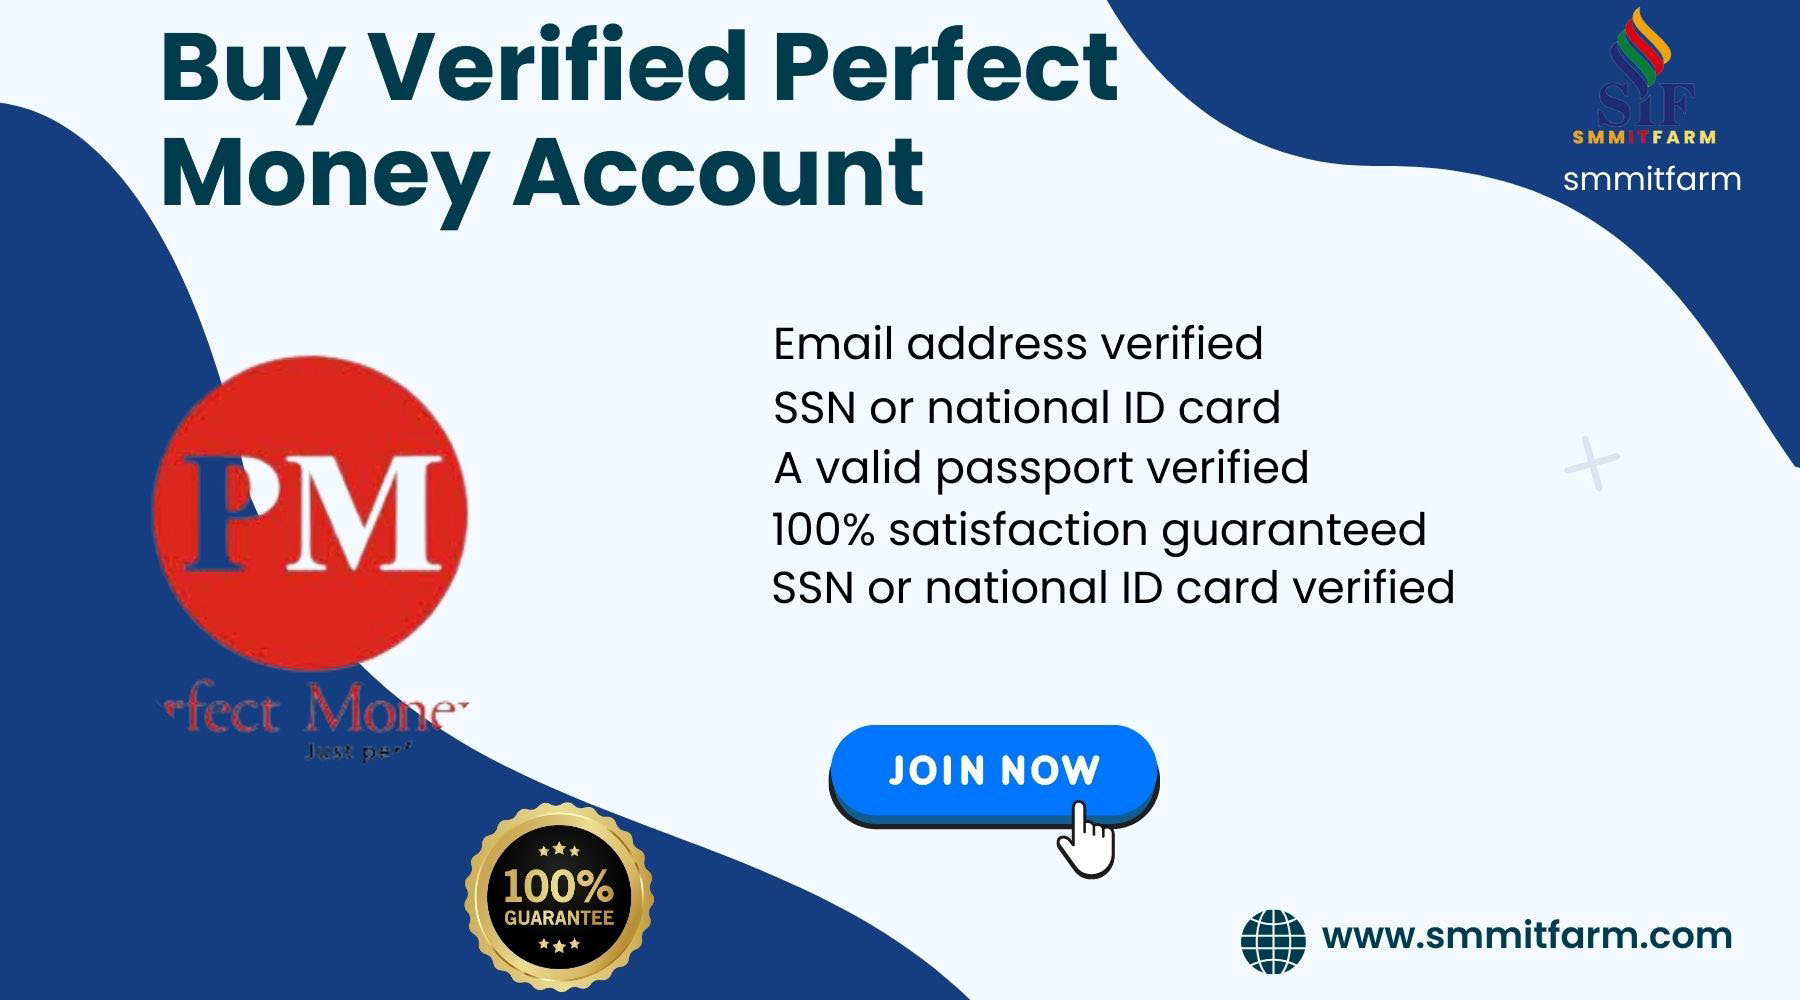 Buy verified perfect money account from smmitfarm with all genuine owner documents such as SSN, Bank account access, and transaction history.